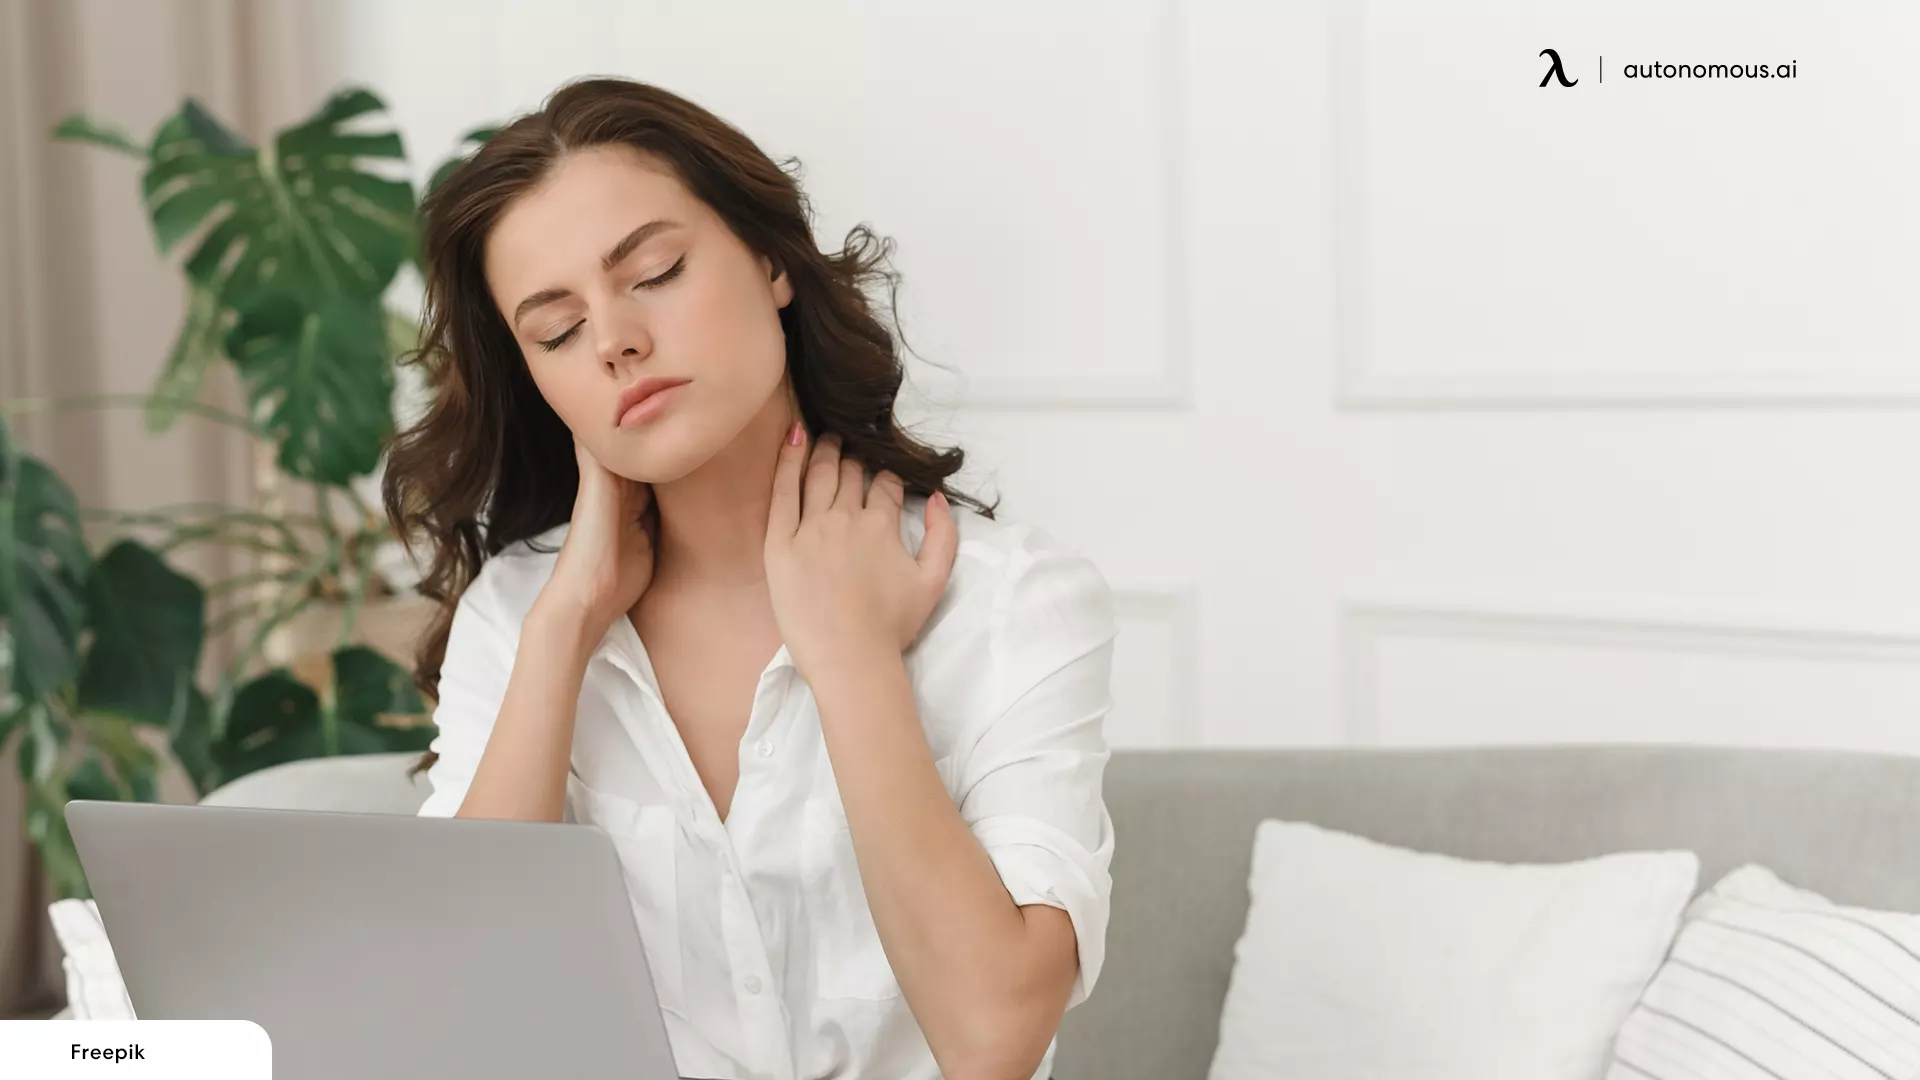 Can neck pain affect the ears?